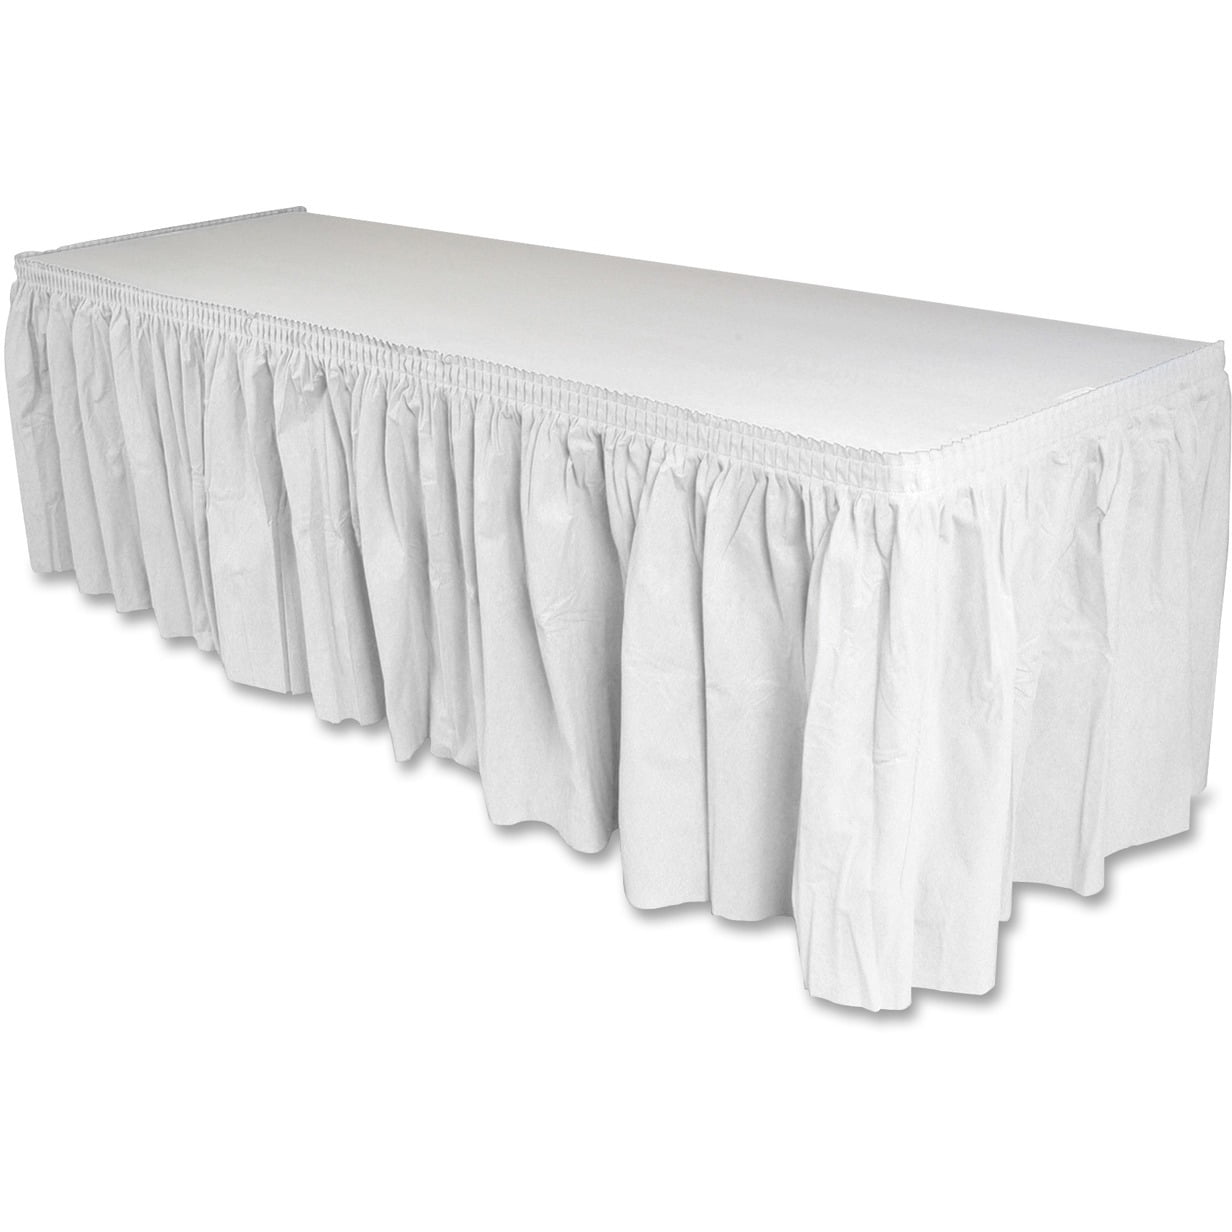 LinenTablecloth 14 ft Accordion Pleat Polyester Table Skirt Black 